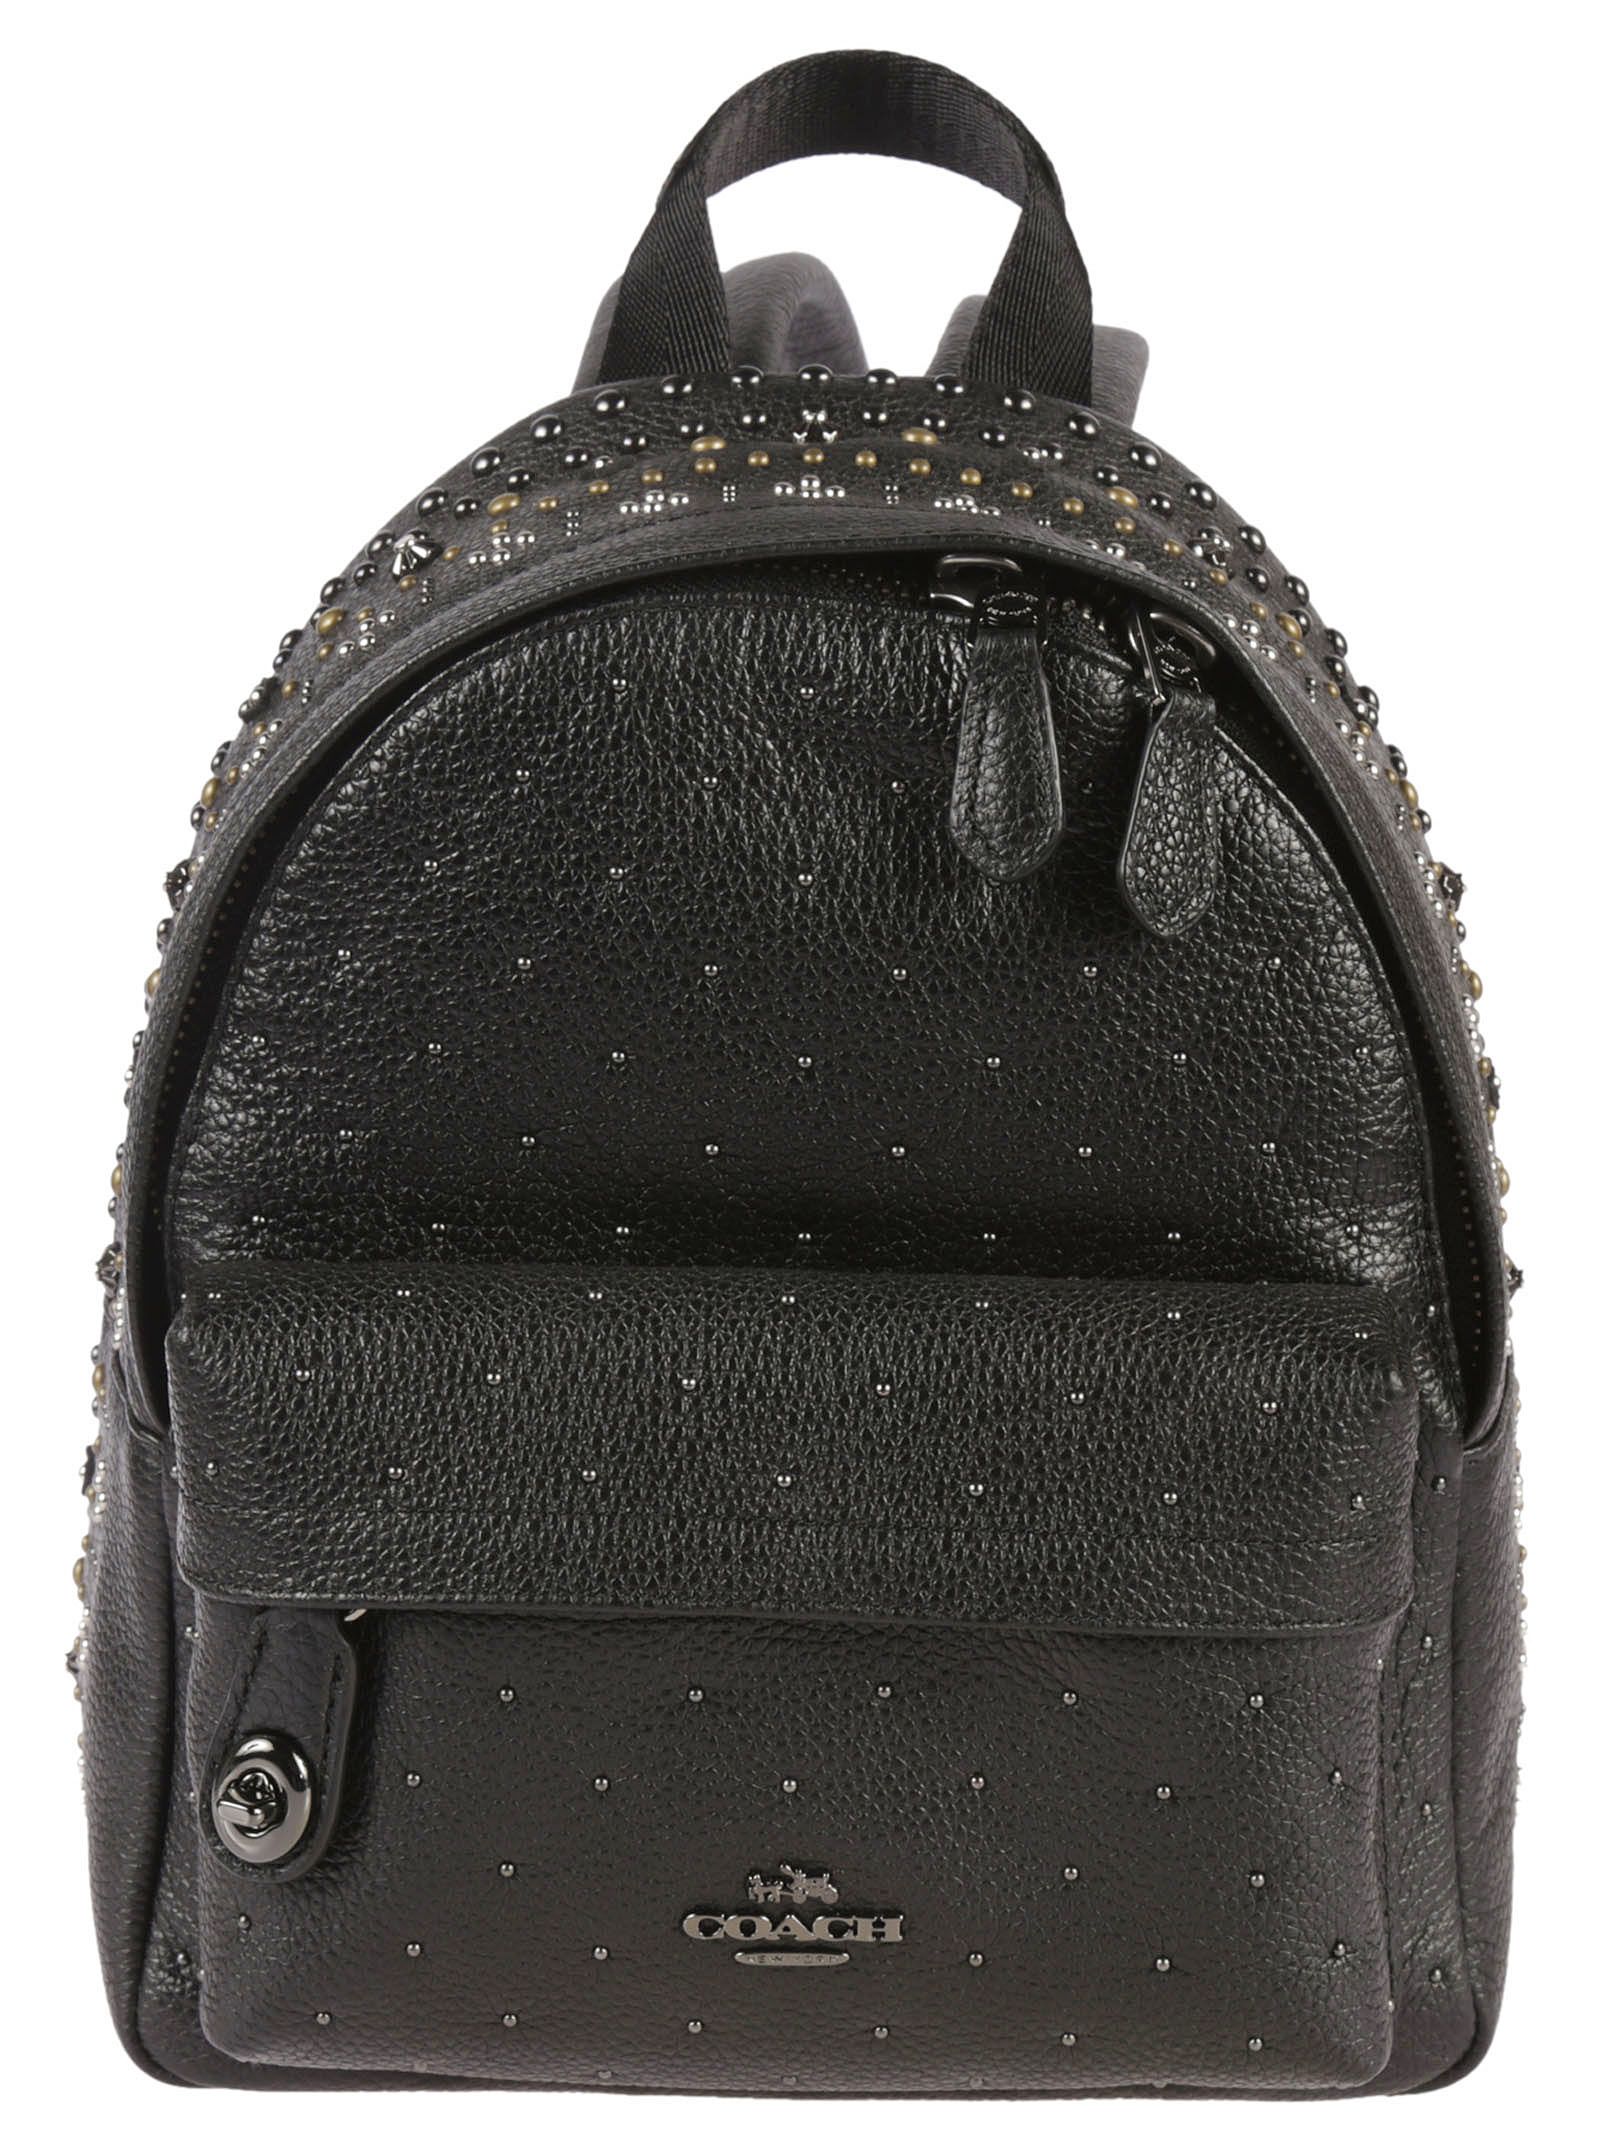 italist | Best price in the market for Coach Coach Mini Studded ...